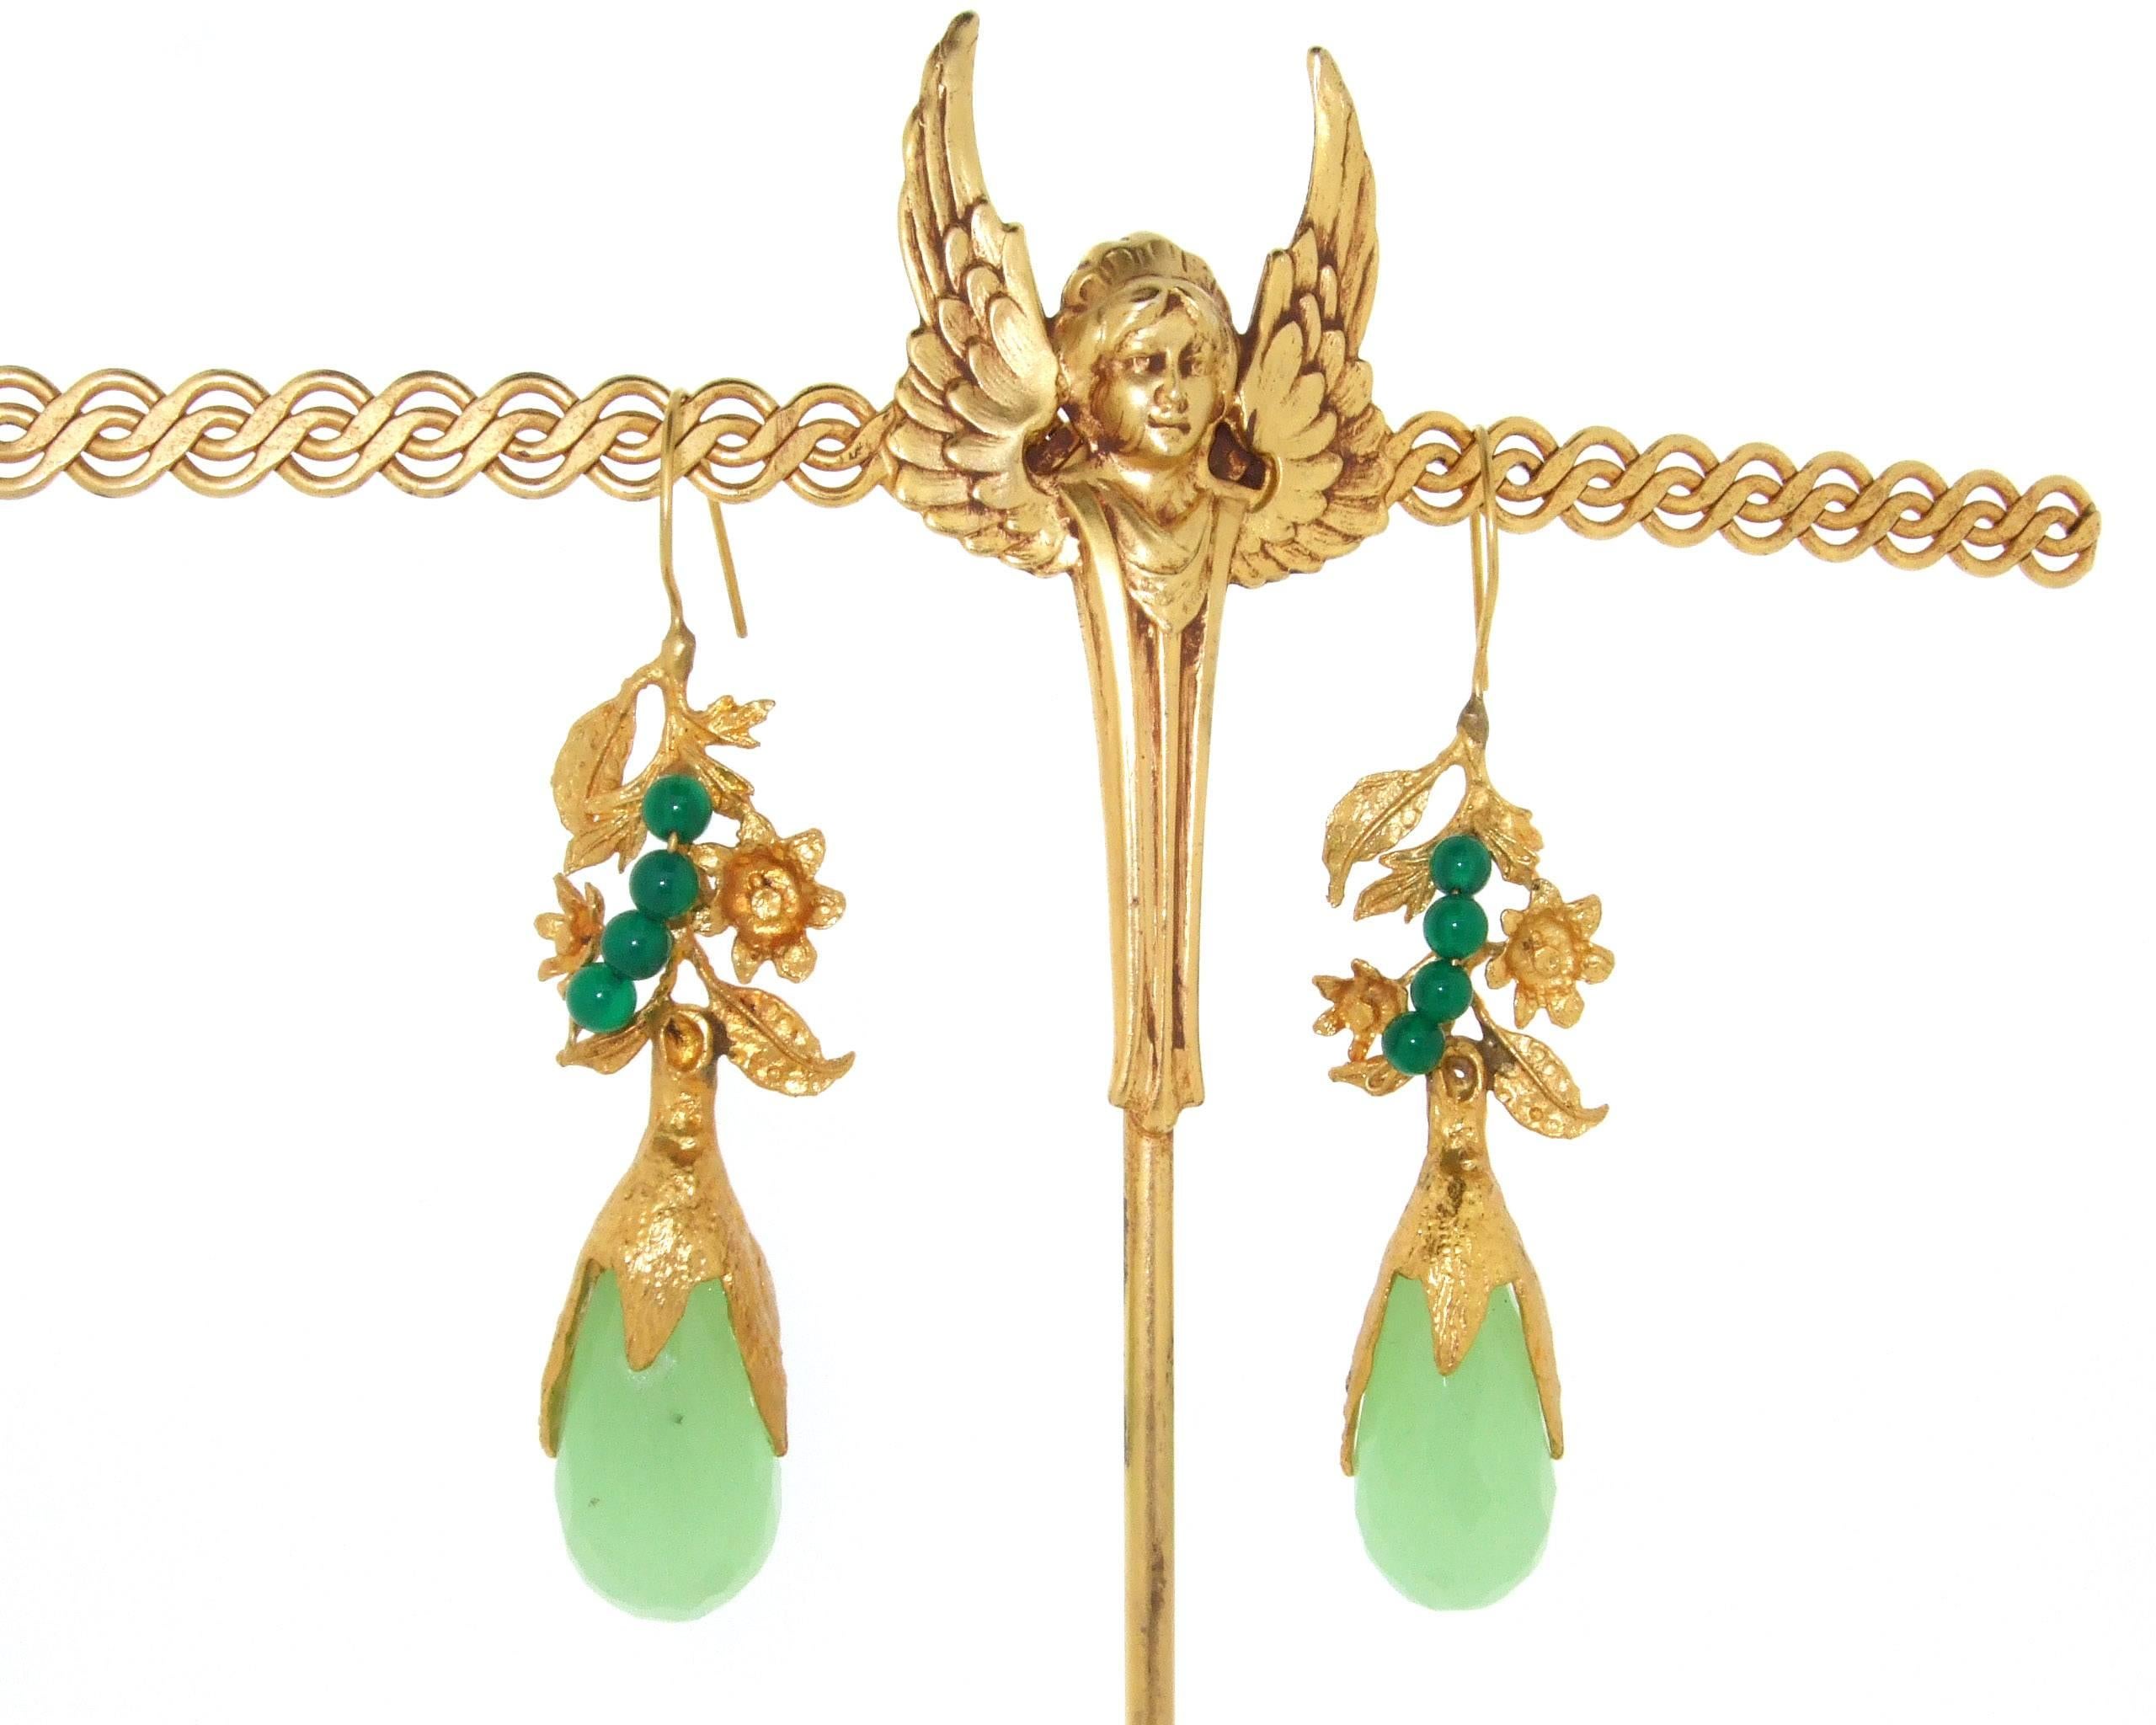 A stunning  pair of mint green chalcedony earrings in an Art Nouveau/ byzantine style, gold plated. 

They measure 7.6cm, the large green stone is 1.3cm wide.
